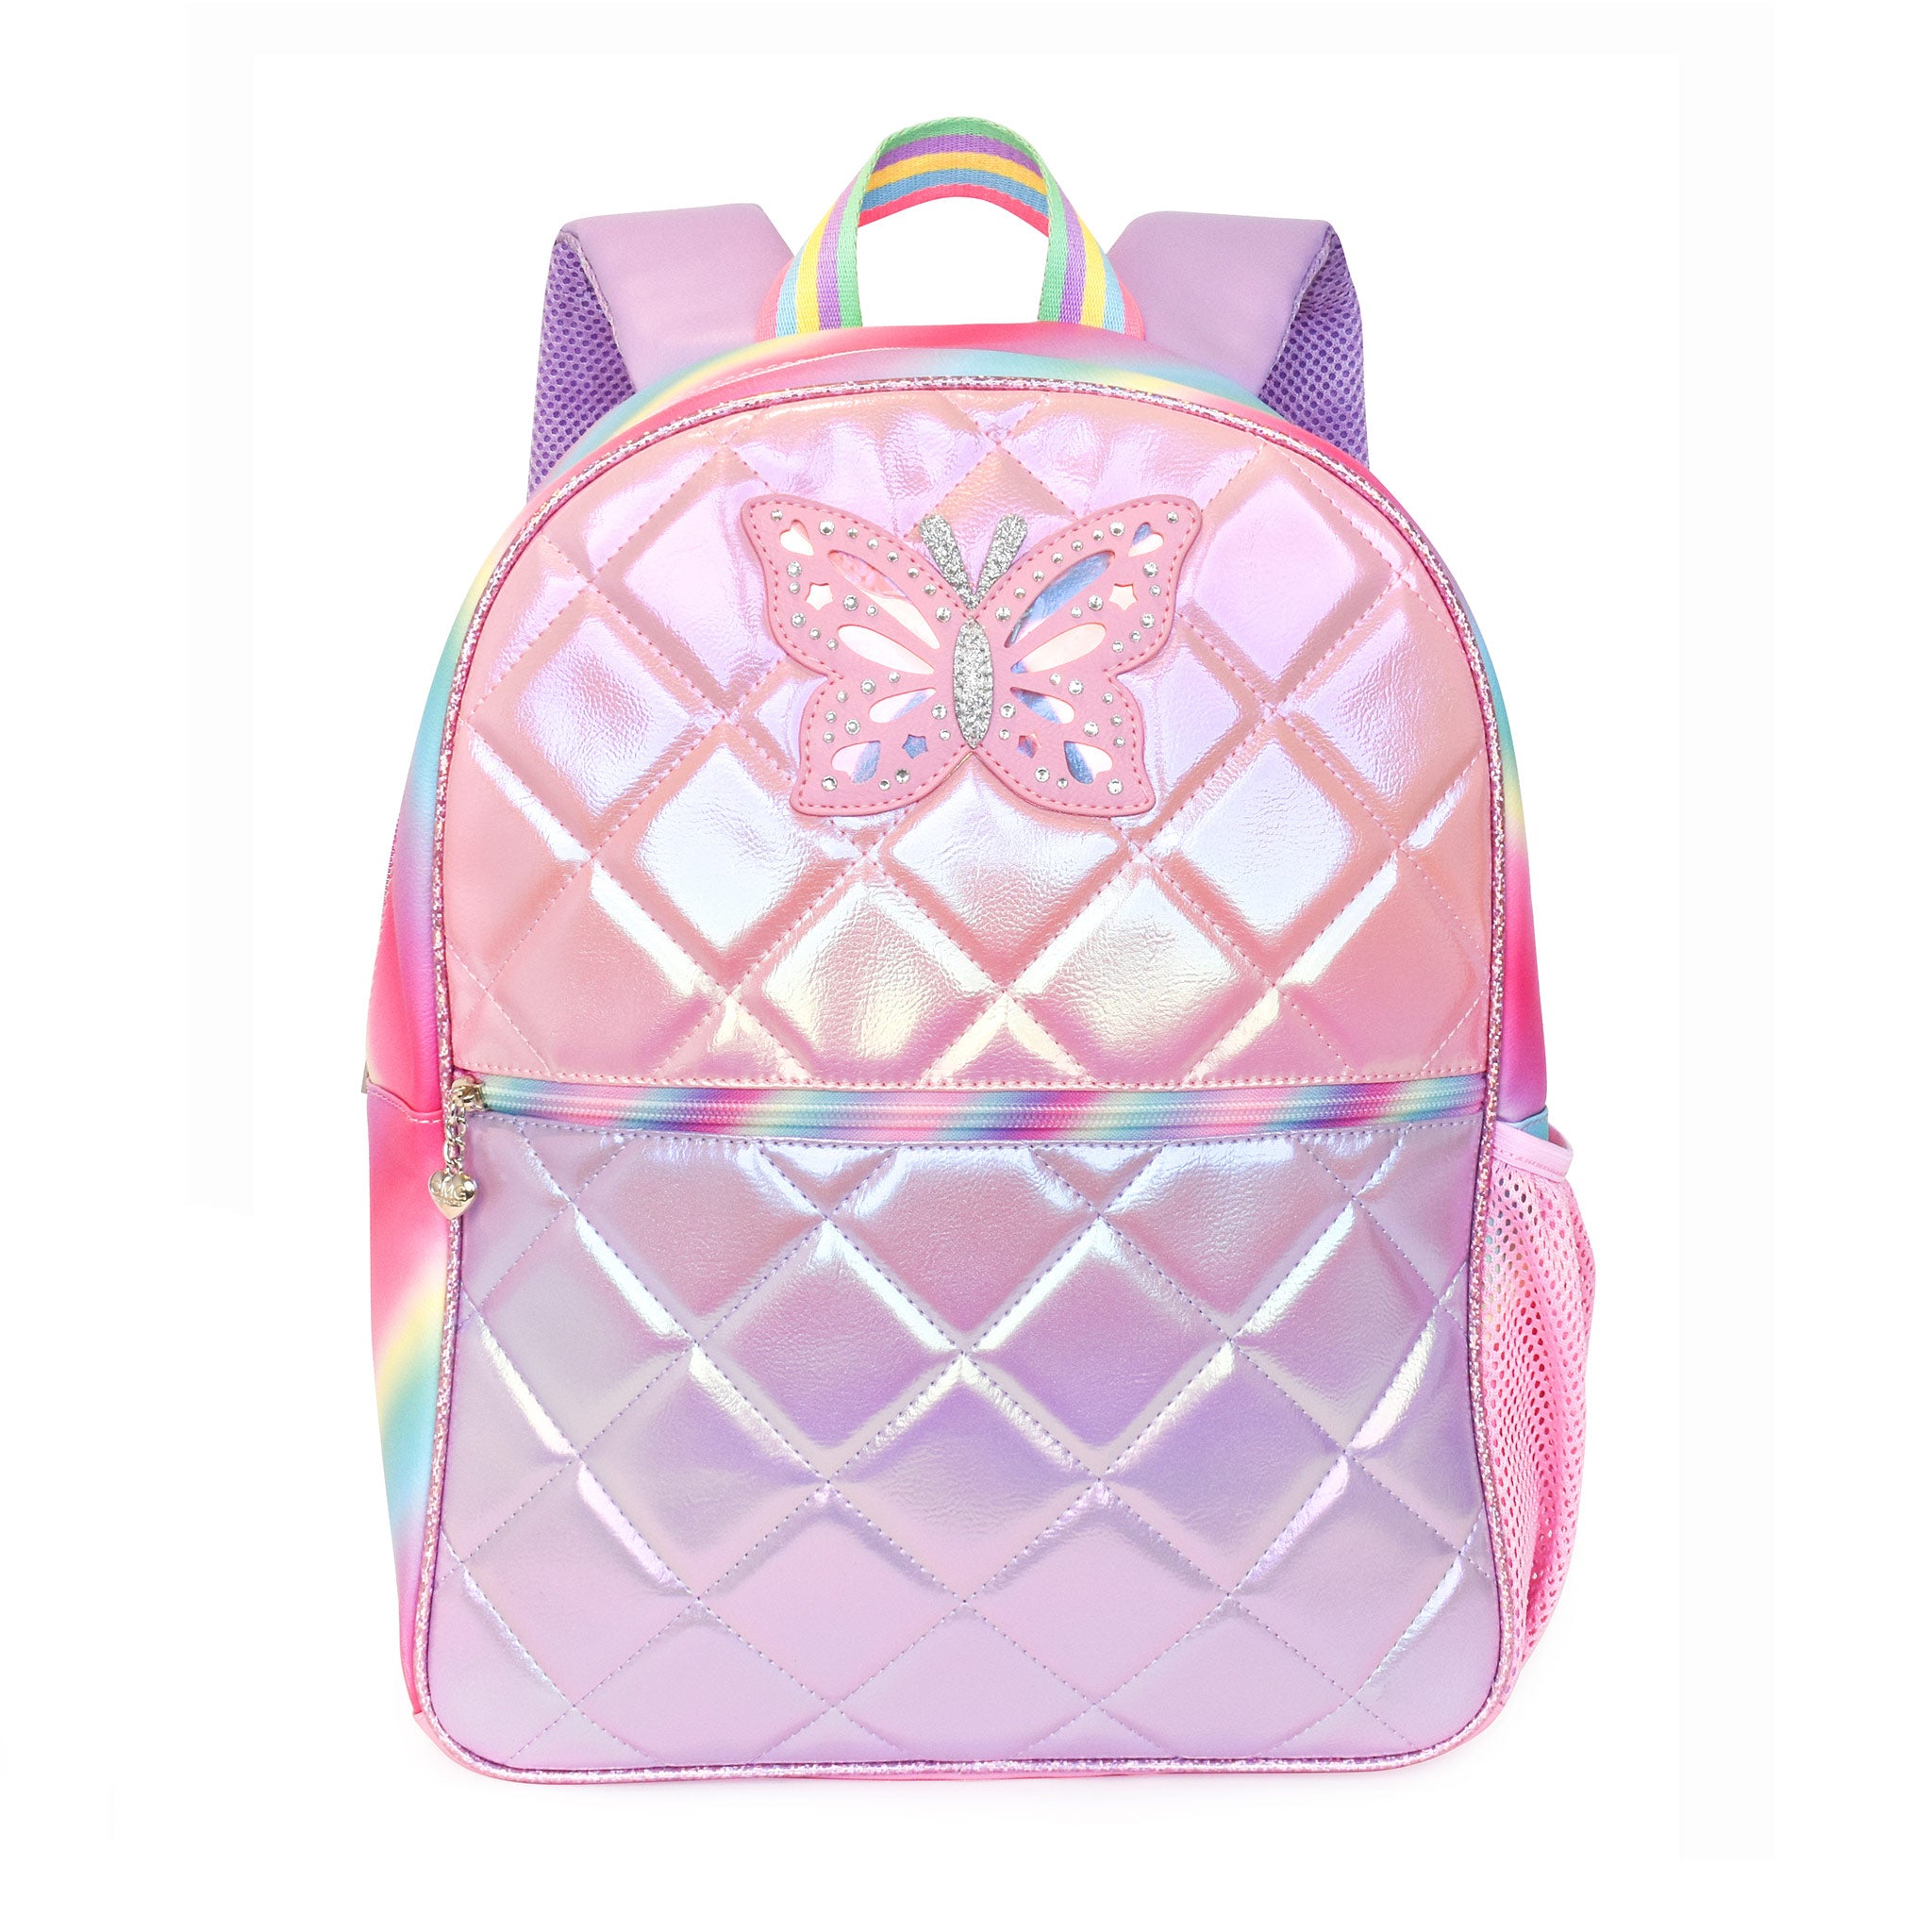 Side view of a metallic pink & purple quilted large backpack with a butterfly applique and a clear pencil pouch